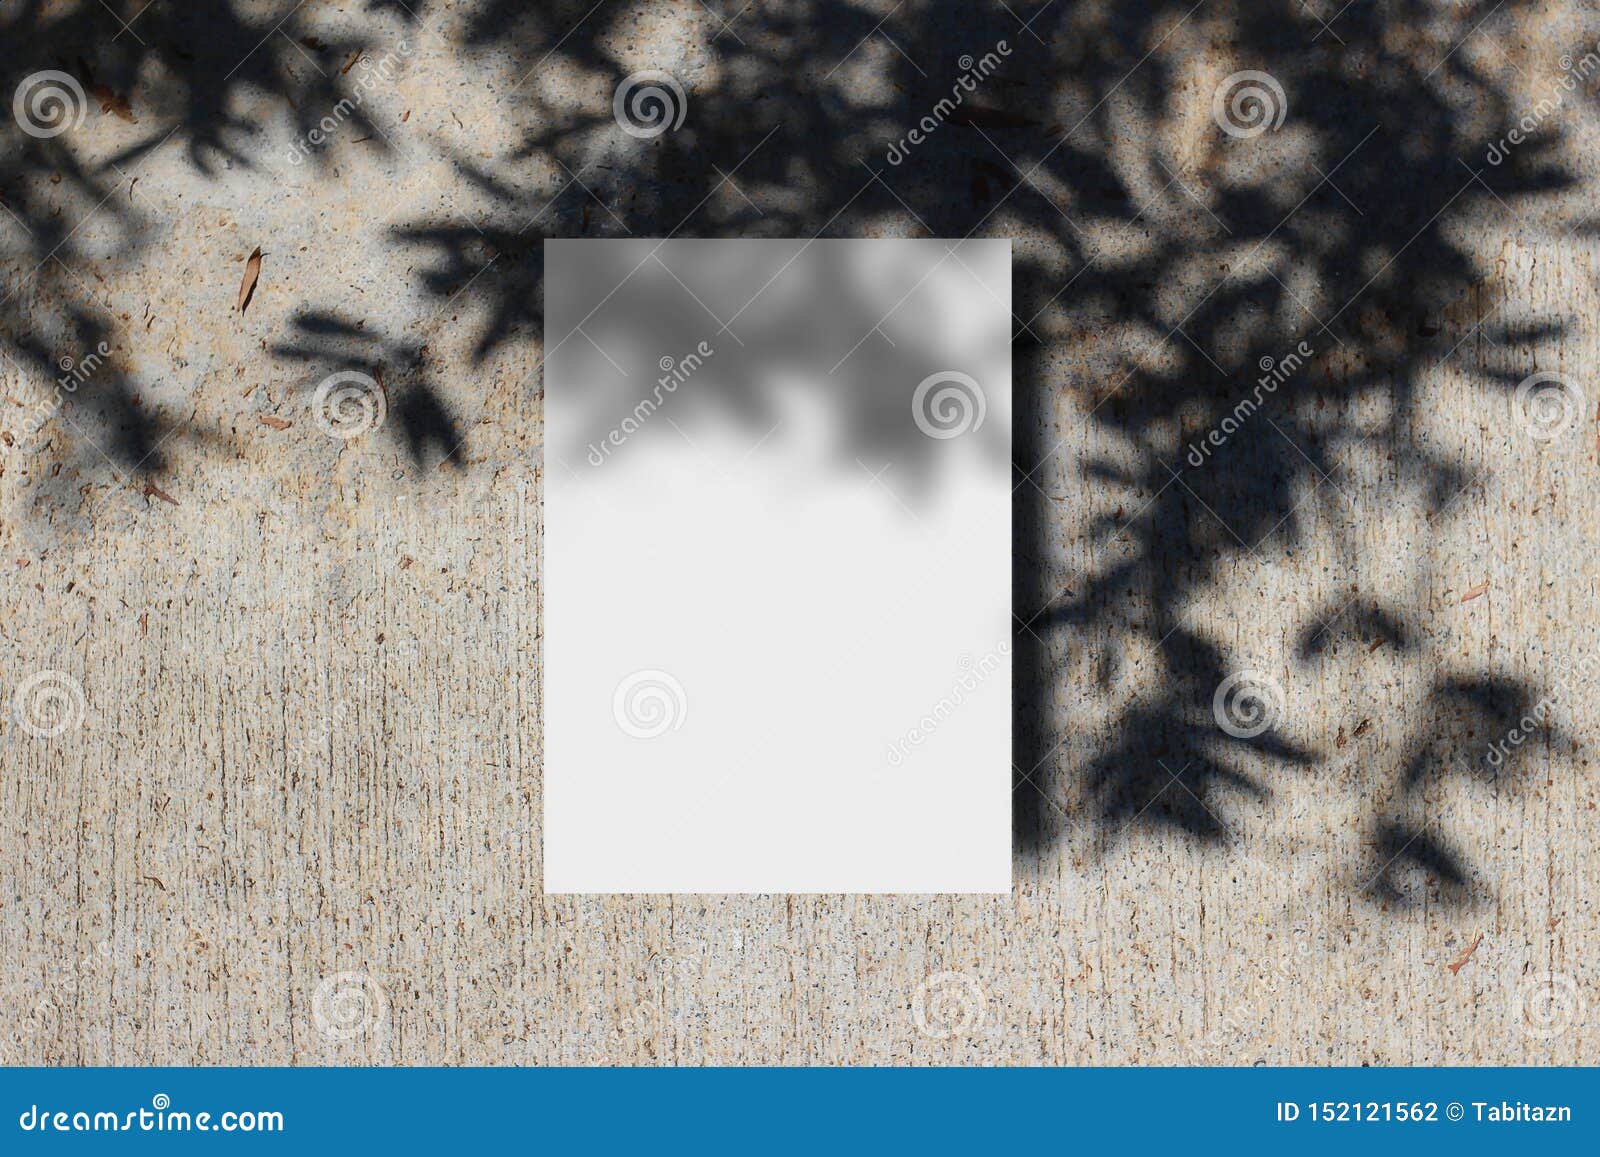 summer stationery mock-up scene. blank greeting card with tree leaf and branches shadow overlay. grunge concrete